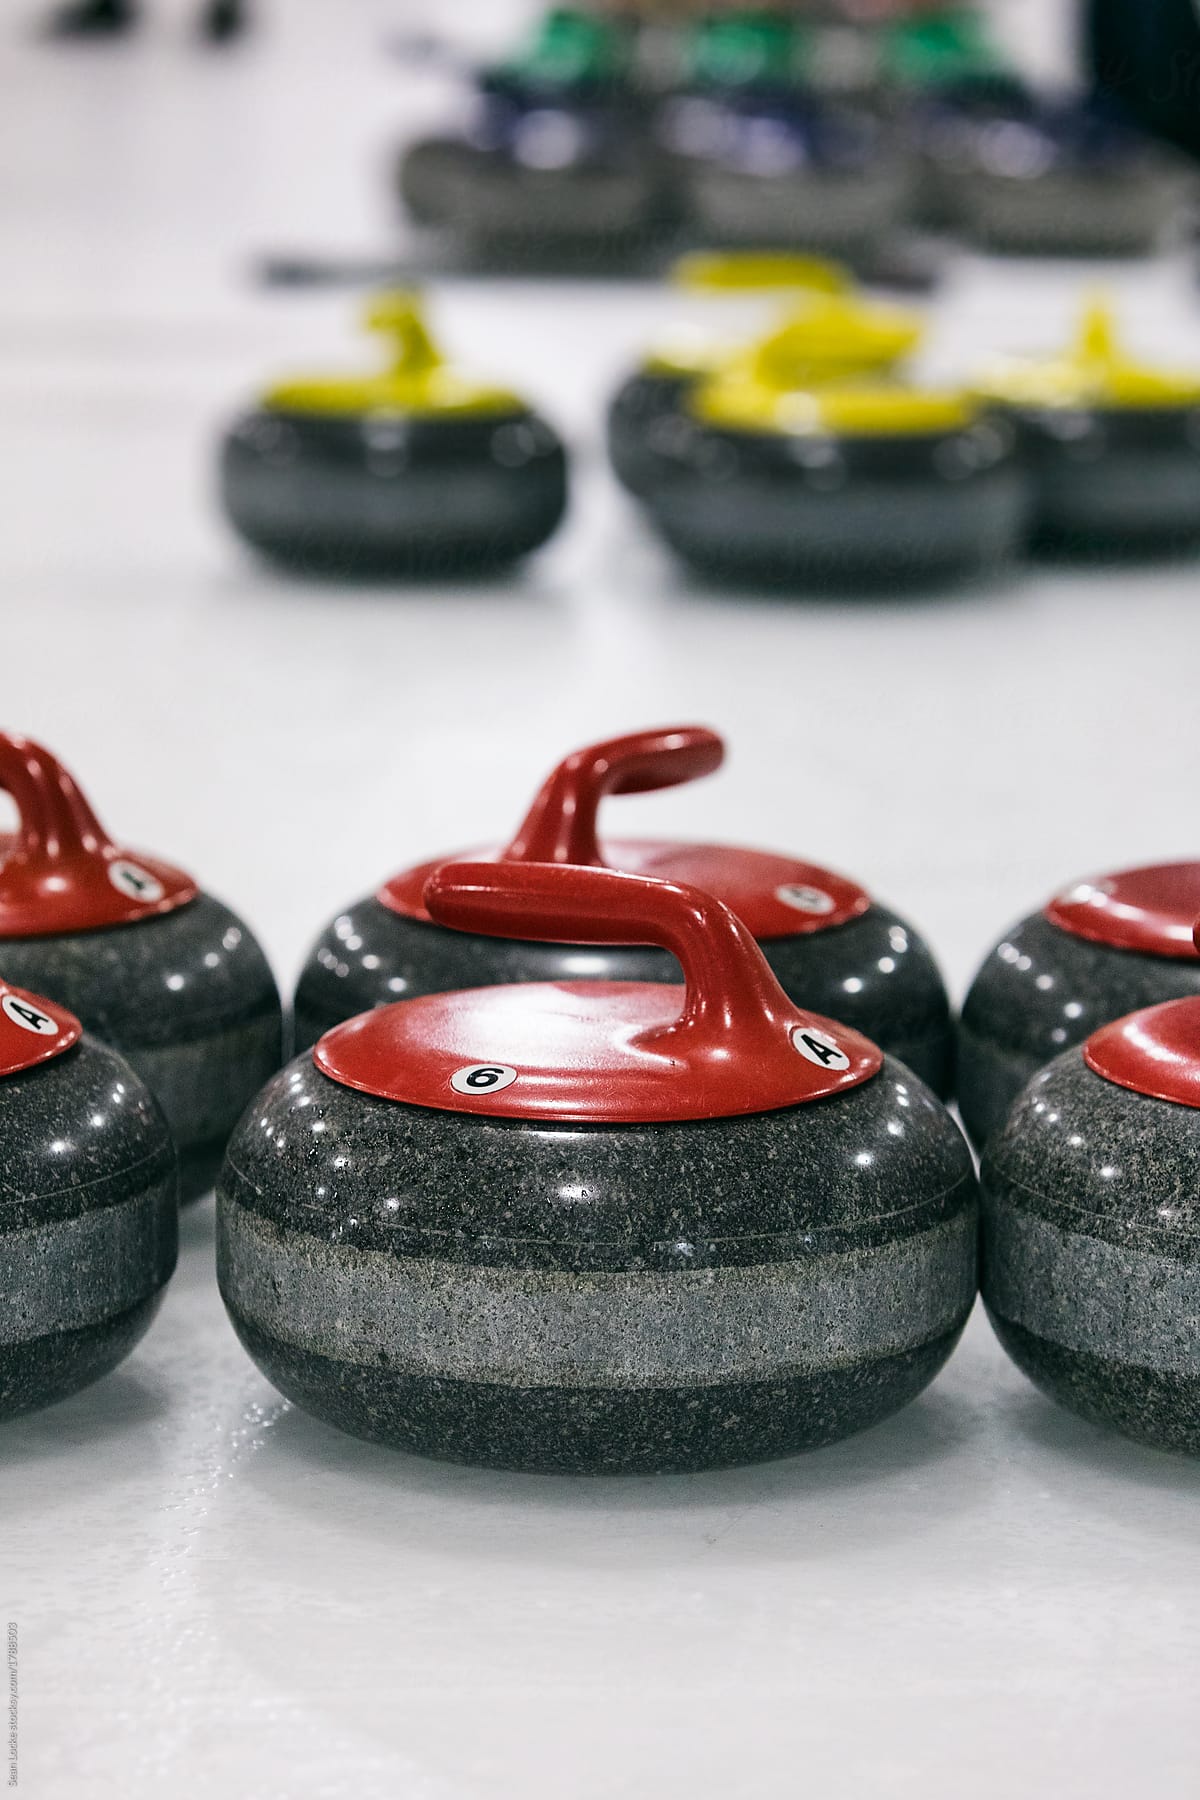 Curling: Various Groups Of Colored Team Stones